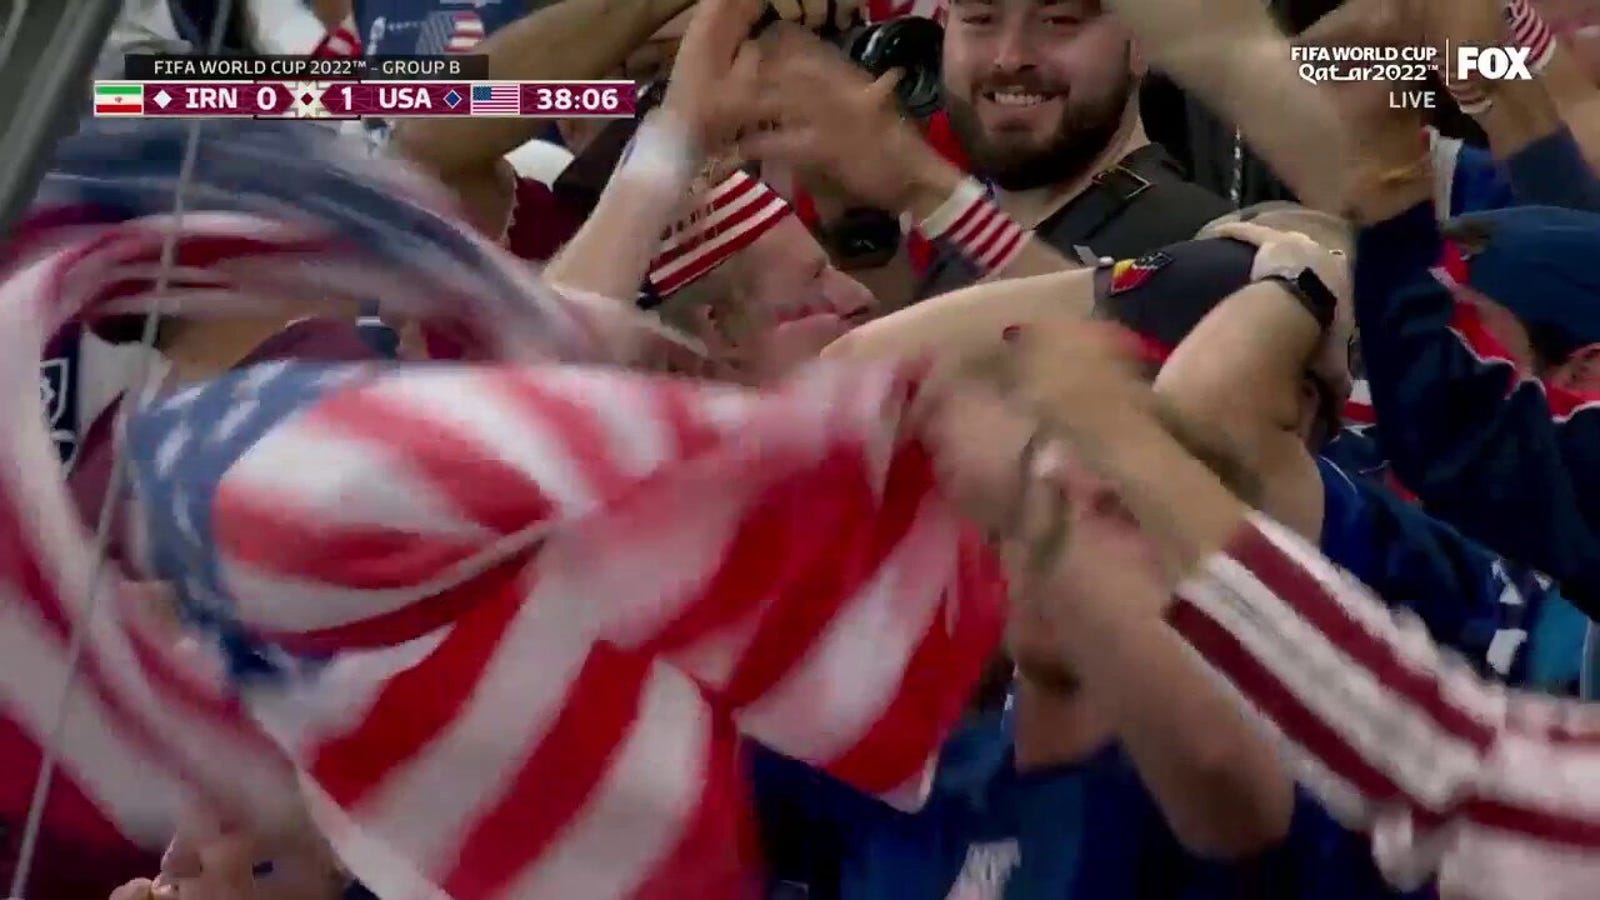 American Christian Pulisic scores a goal against Iran in 38 minutes |  World Cup 2022